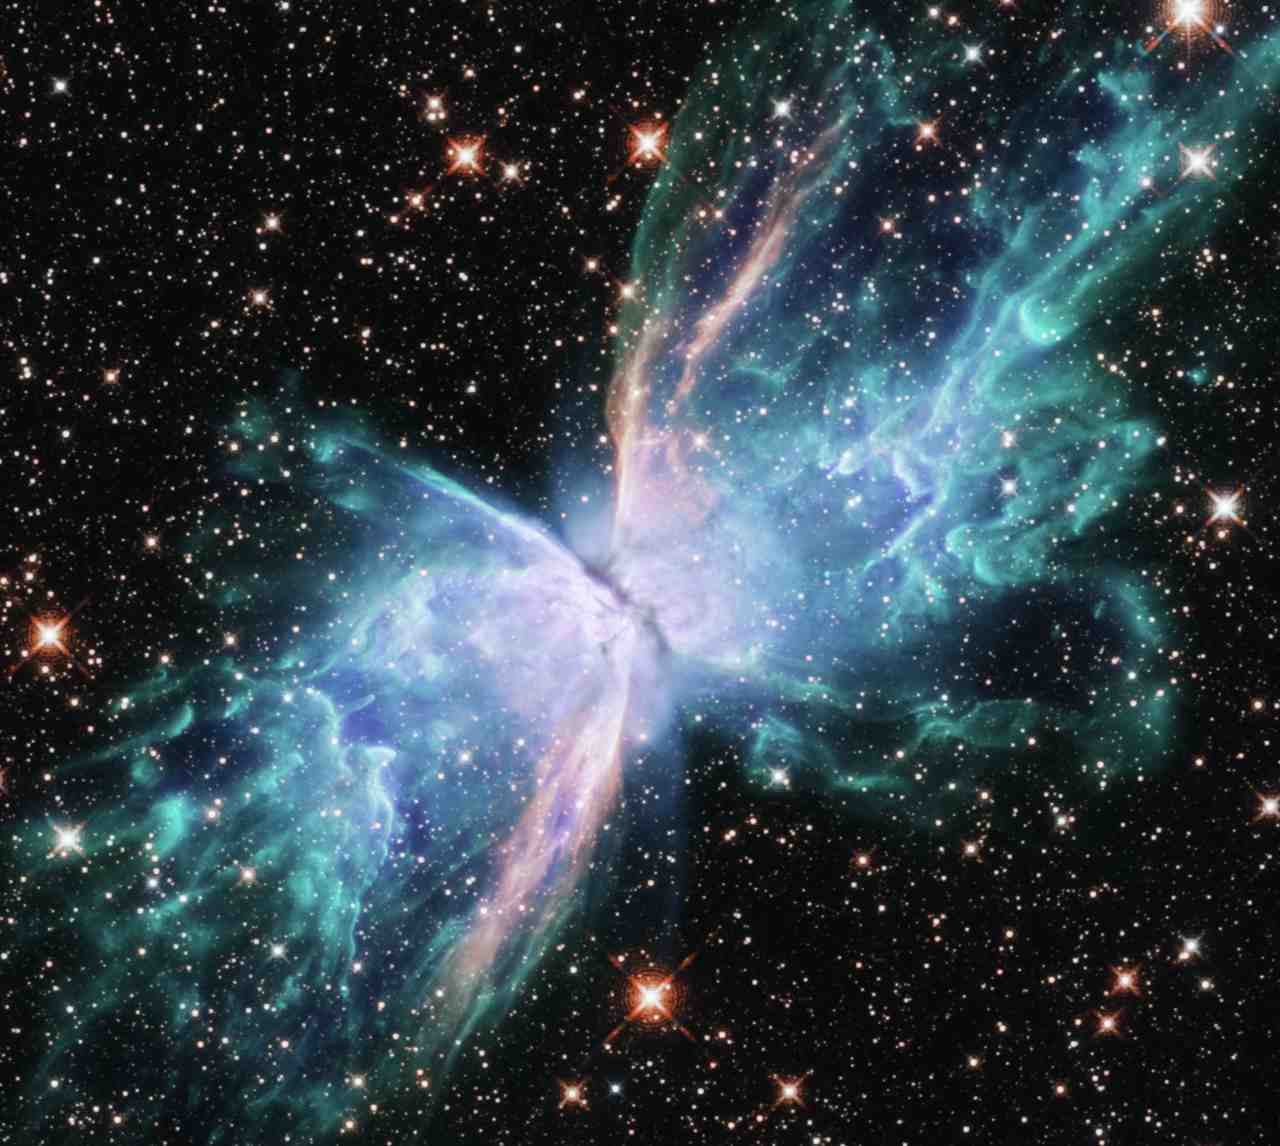 Hubble was recently retrained on NGC 6302, the Butterfly Nebula, so researchers could observe it across a more complete spectrum from near-UV to near-IR. This also opens up prospects to help researchers better understand the mechanics at work in its technicolor 'wings' of gas. Image: NASA